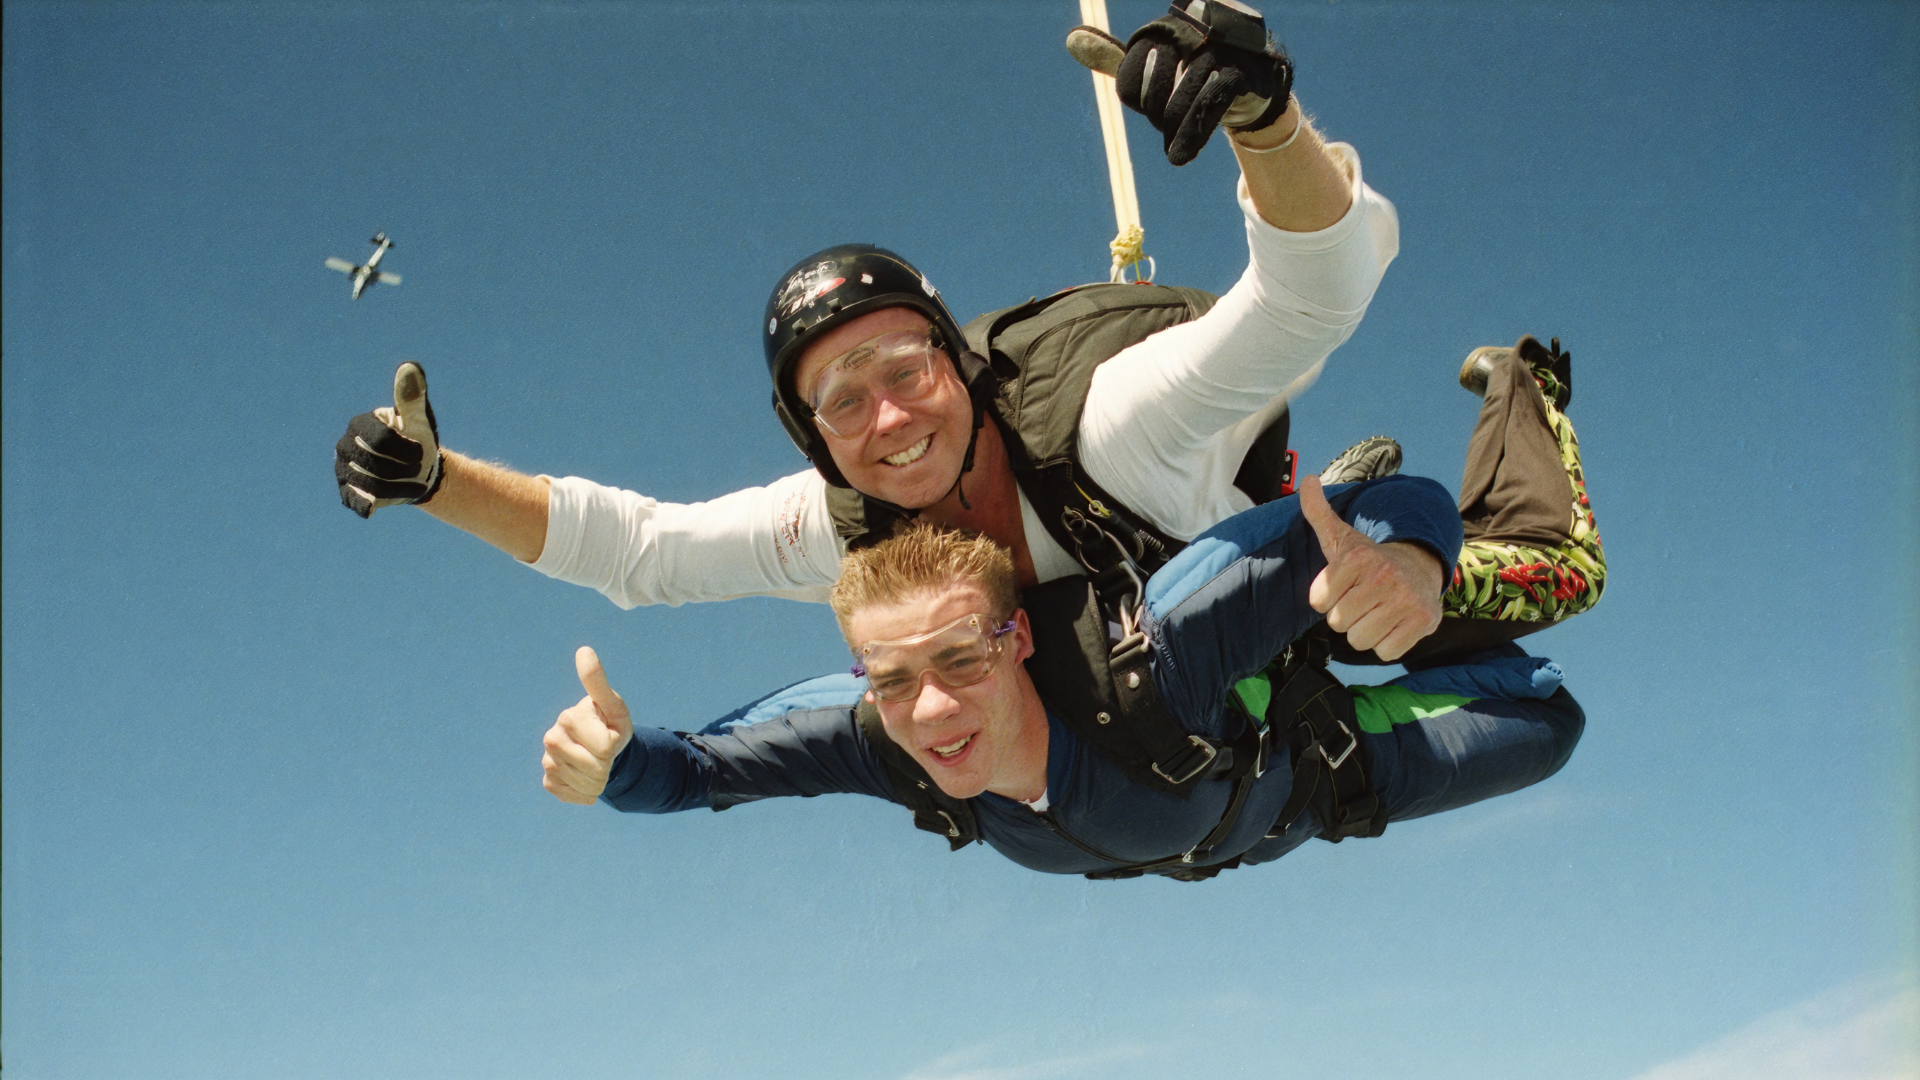 Skydiving to fundraise for Hope and Homes for Children